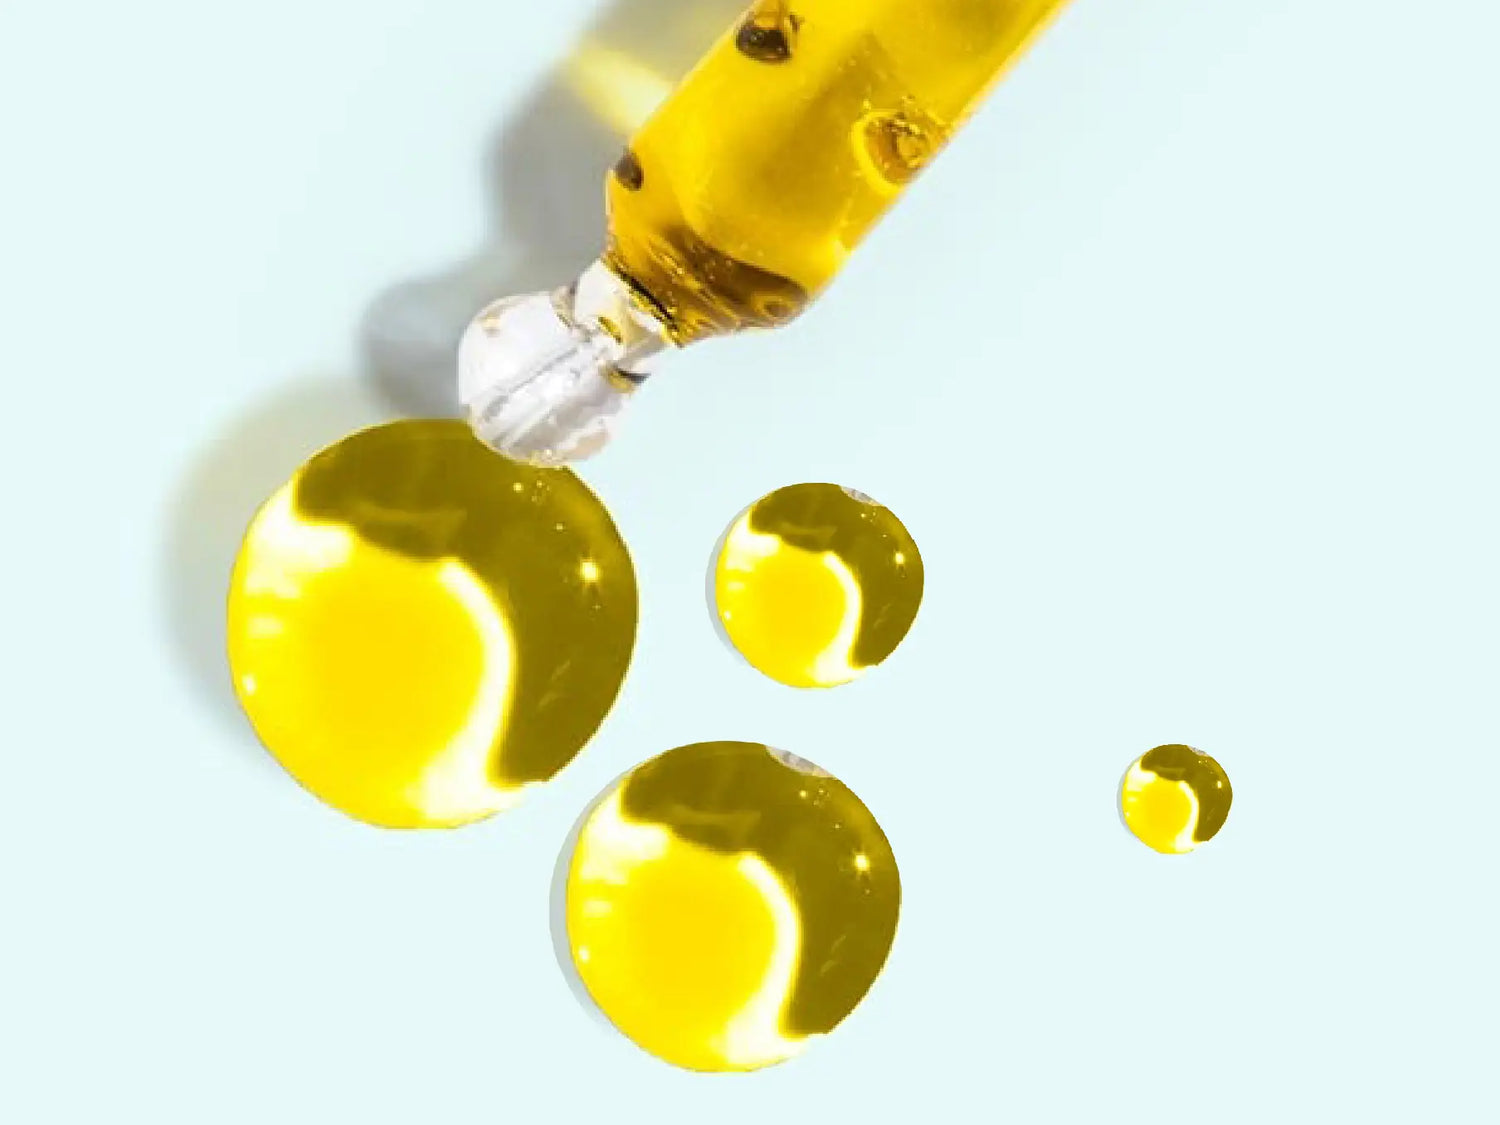 Pipette and drops showing the golden color of the CBD oil